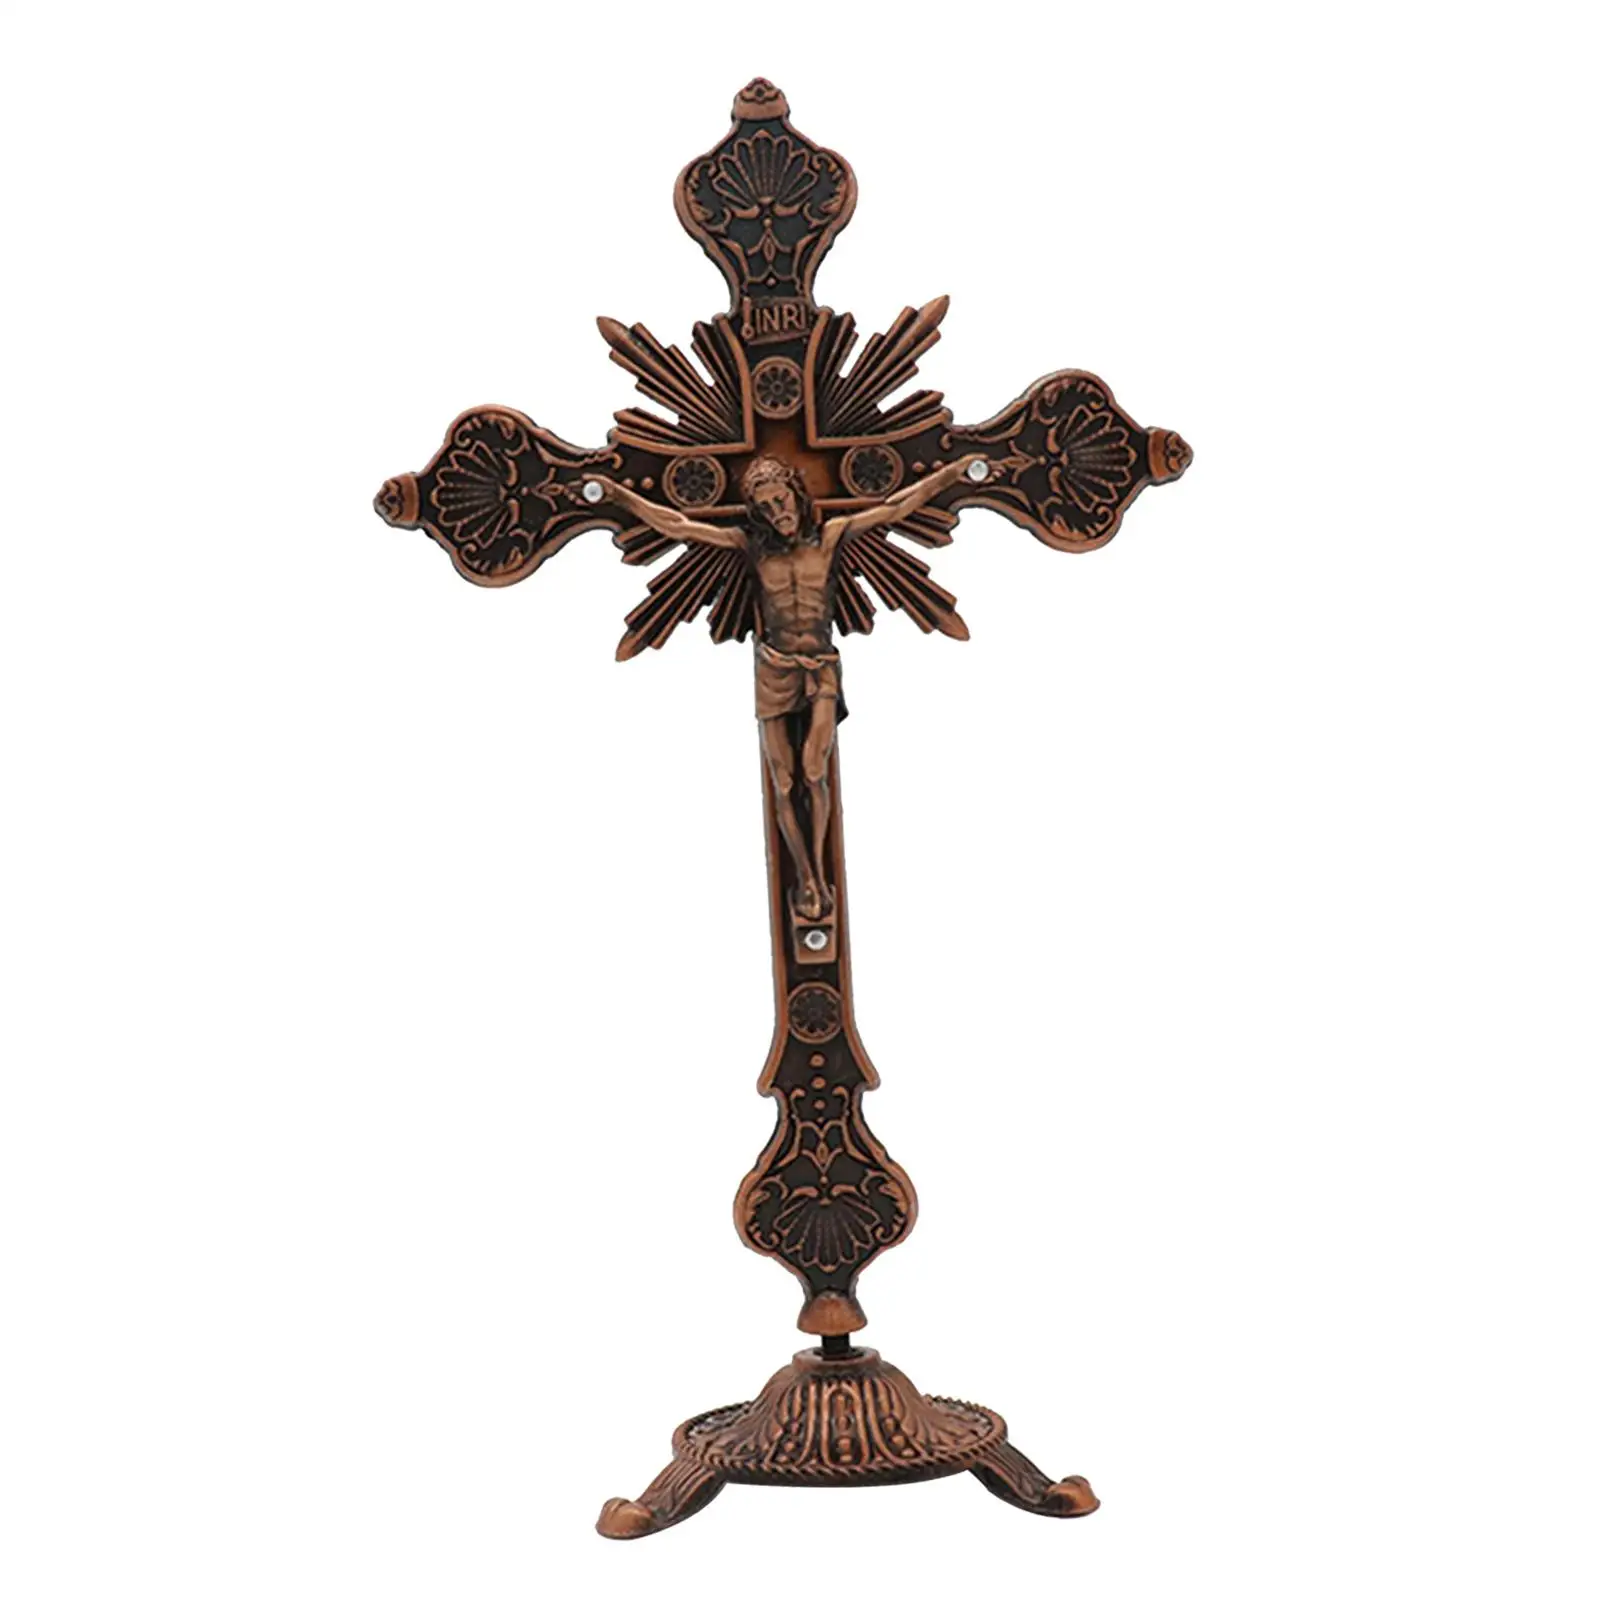 Standing Crucifix 10 Inches Small Metal Table Cross for Altar Table Chapel